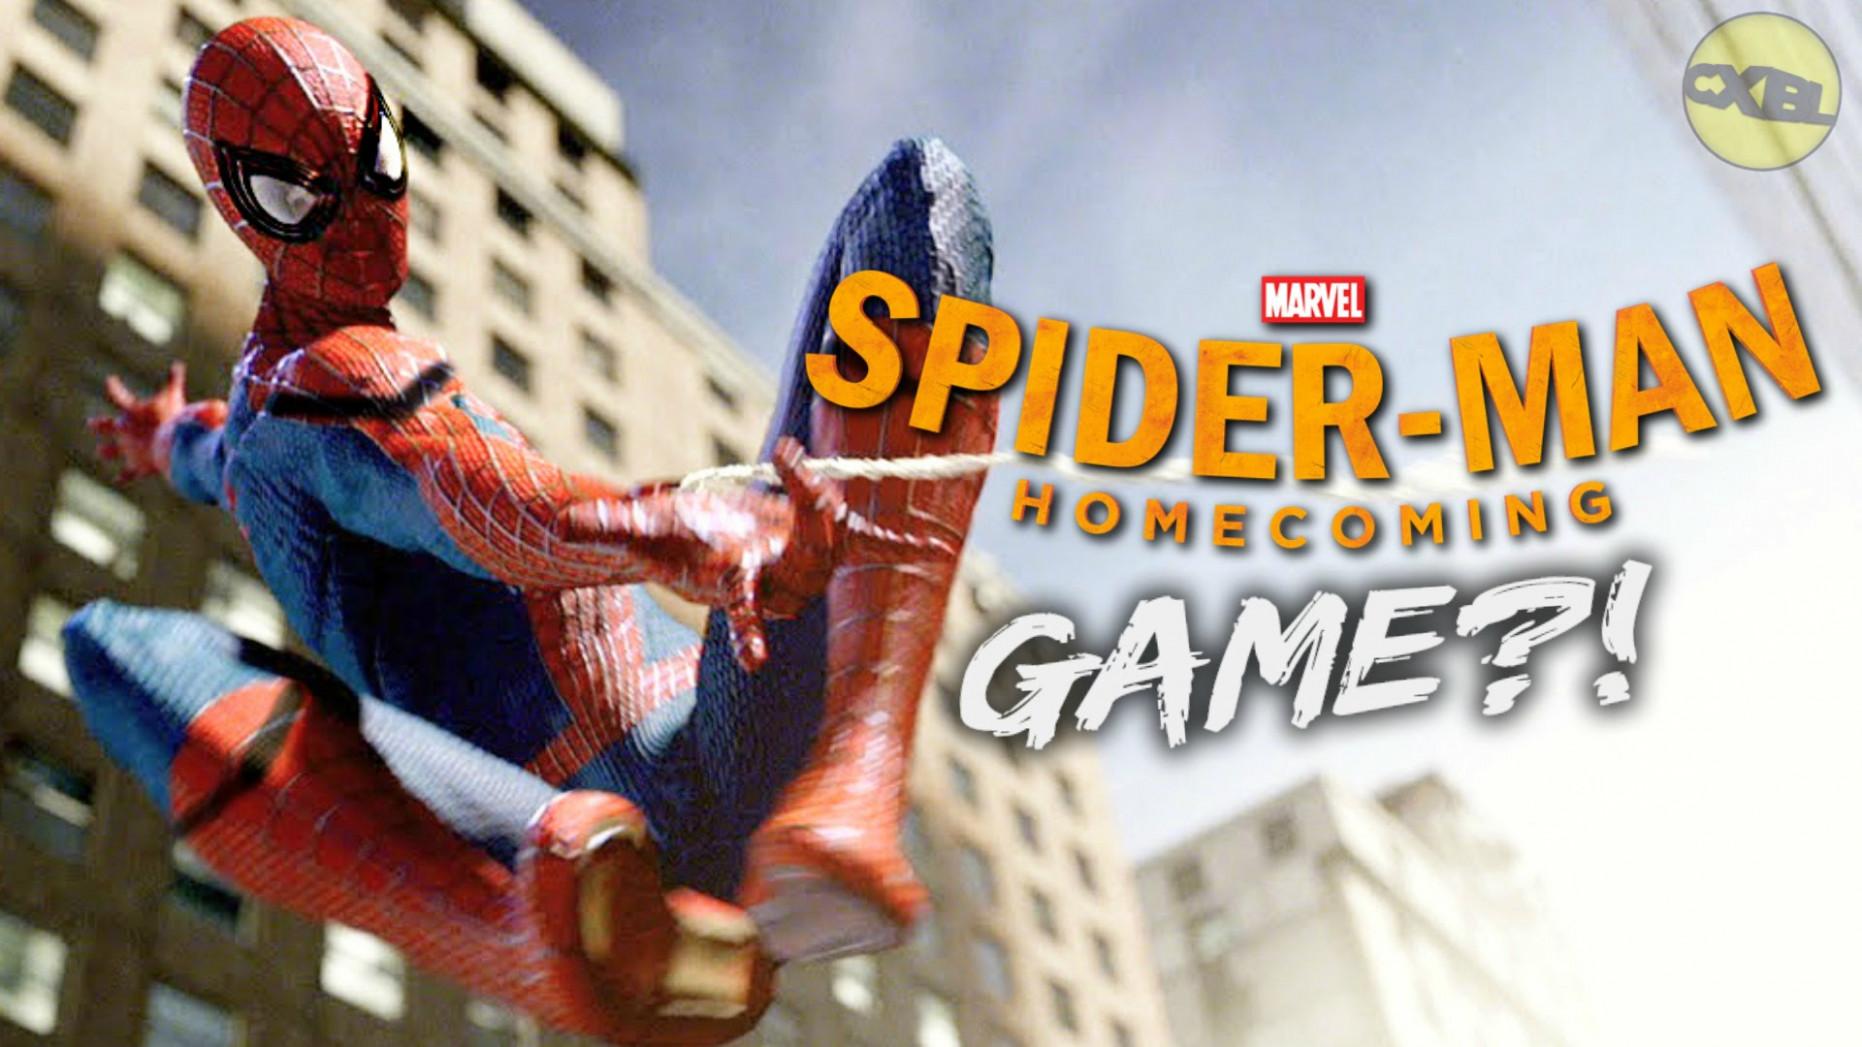 Homecoming Hd Wallpapers - Spider Man Amazing 2 Game - HD Wallpaper 